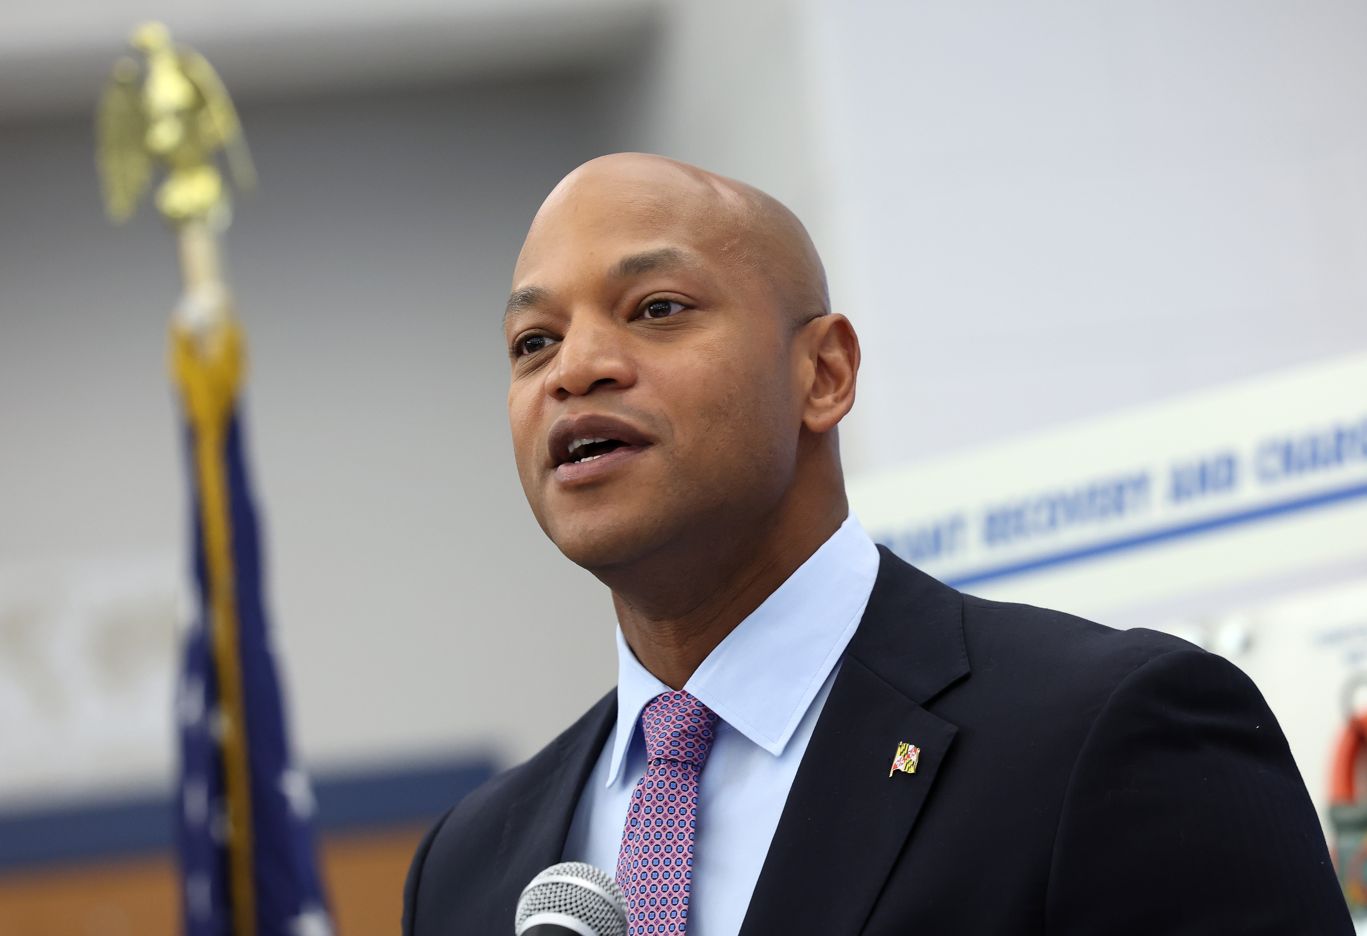 Maryland Gov. Wes Moore announced Friday that the state is making a $27.2 million investment in devices as part of an effort to ensure residents have 